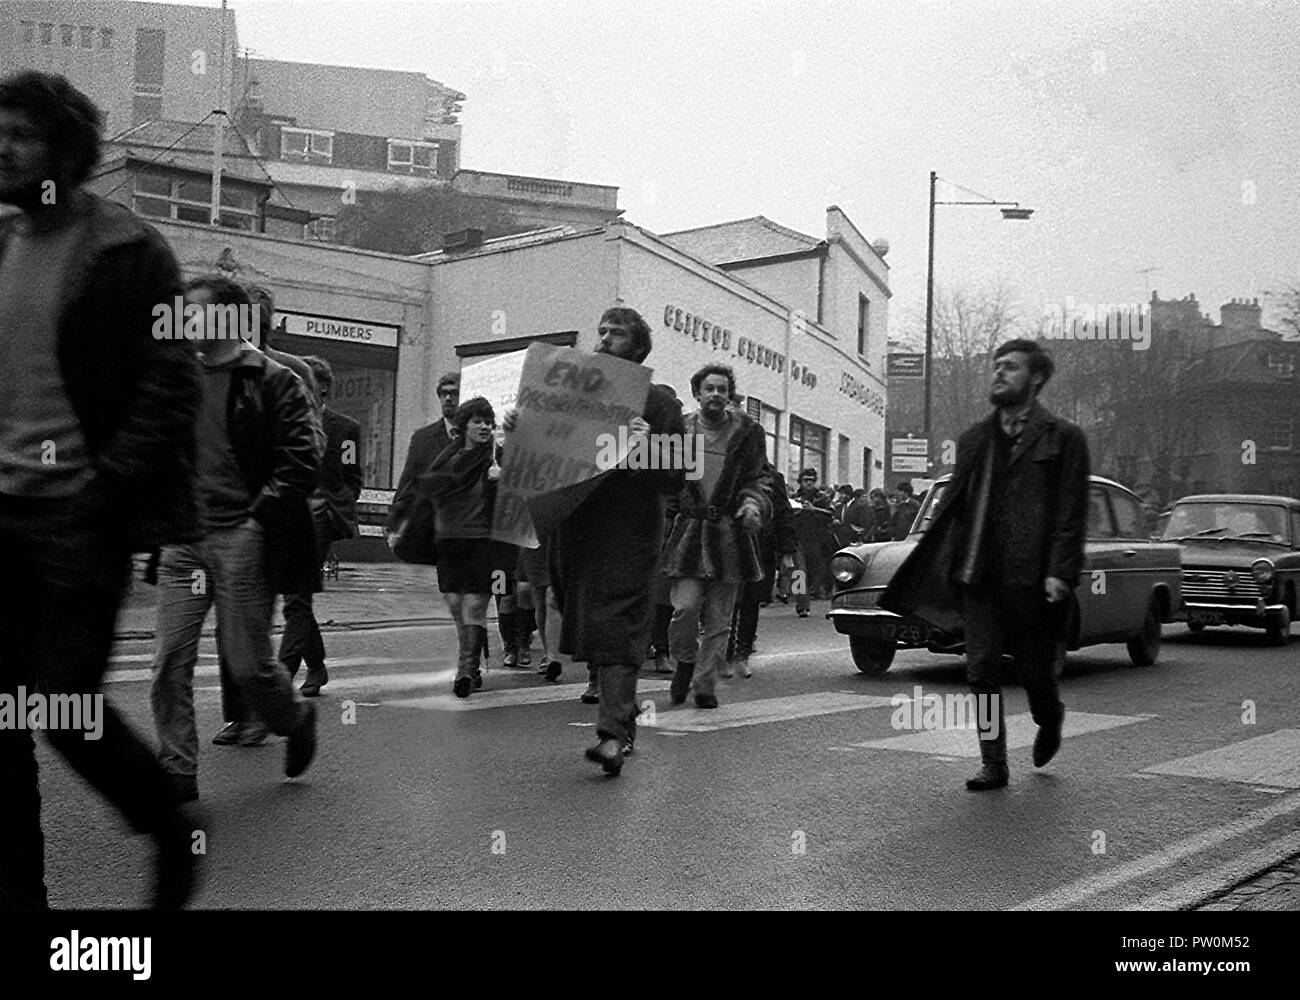 Student demonstrators march through Clifton to Bristol University’s Senate House administrative building at the start of a protest sit-in that began on 5 December 1968 and continued for 11 days.   The students were campaigning for a greater say in the running of the university.  They also wanted the university’s students’ union to be opened up to students from other educational establishments in the city. Stock Photo